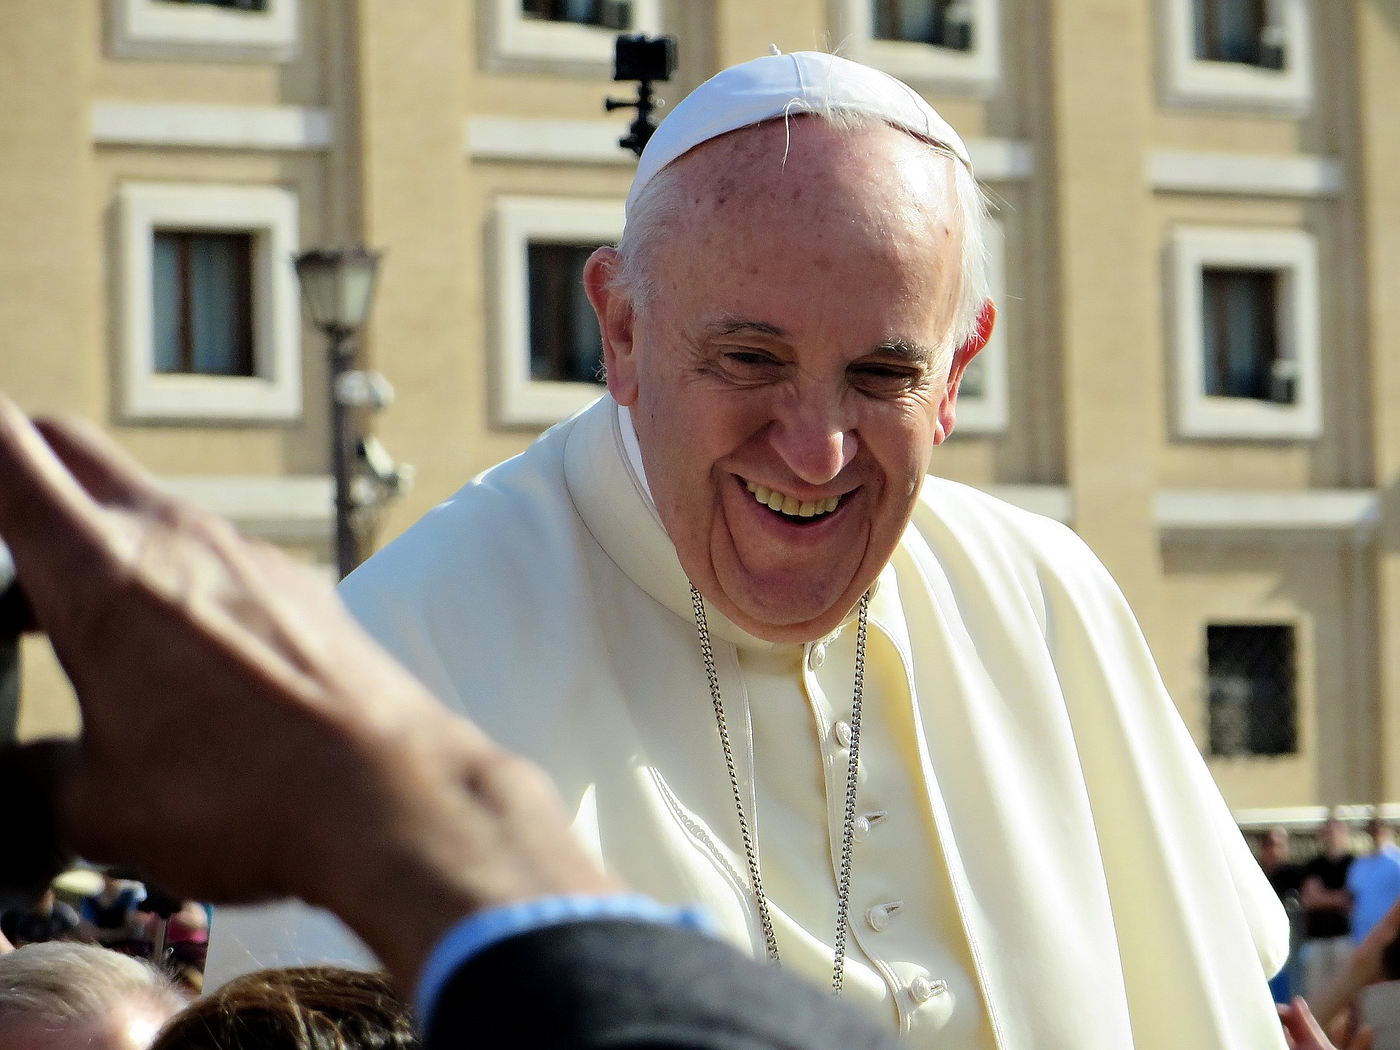 Pope Francis: What We Are Is His Gift | by Joseph Serwach | Catholic Way  Home | Medium